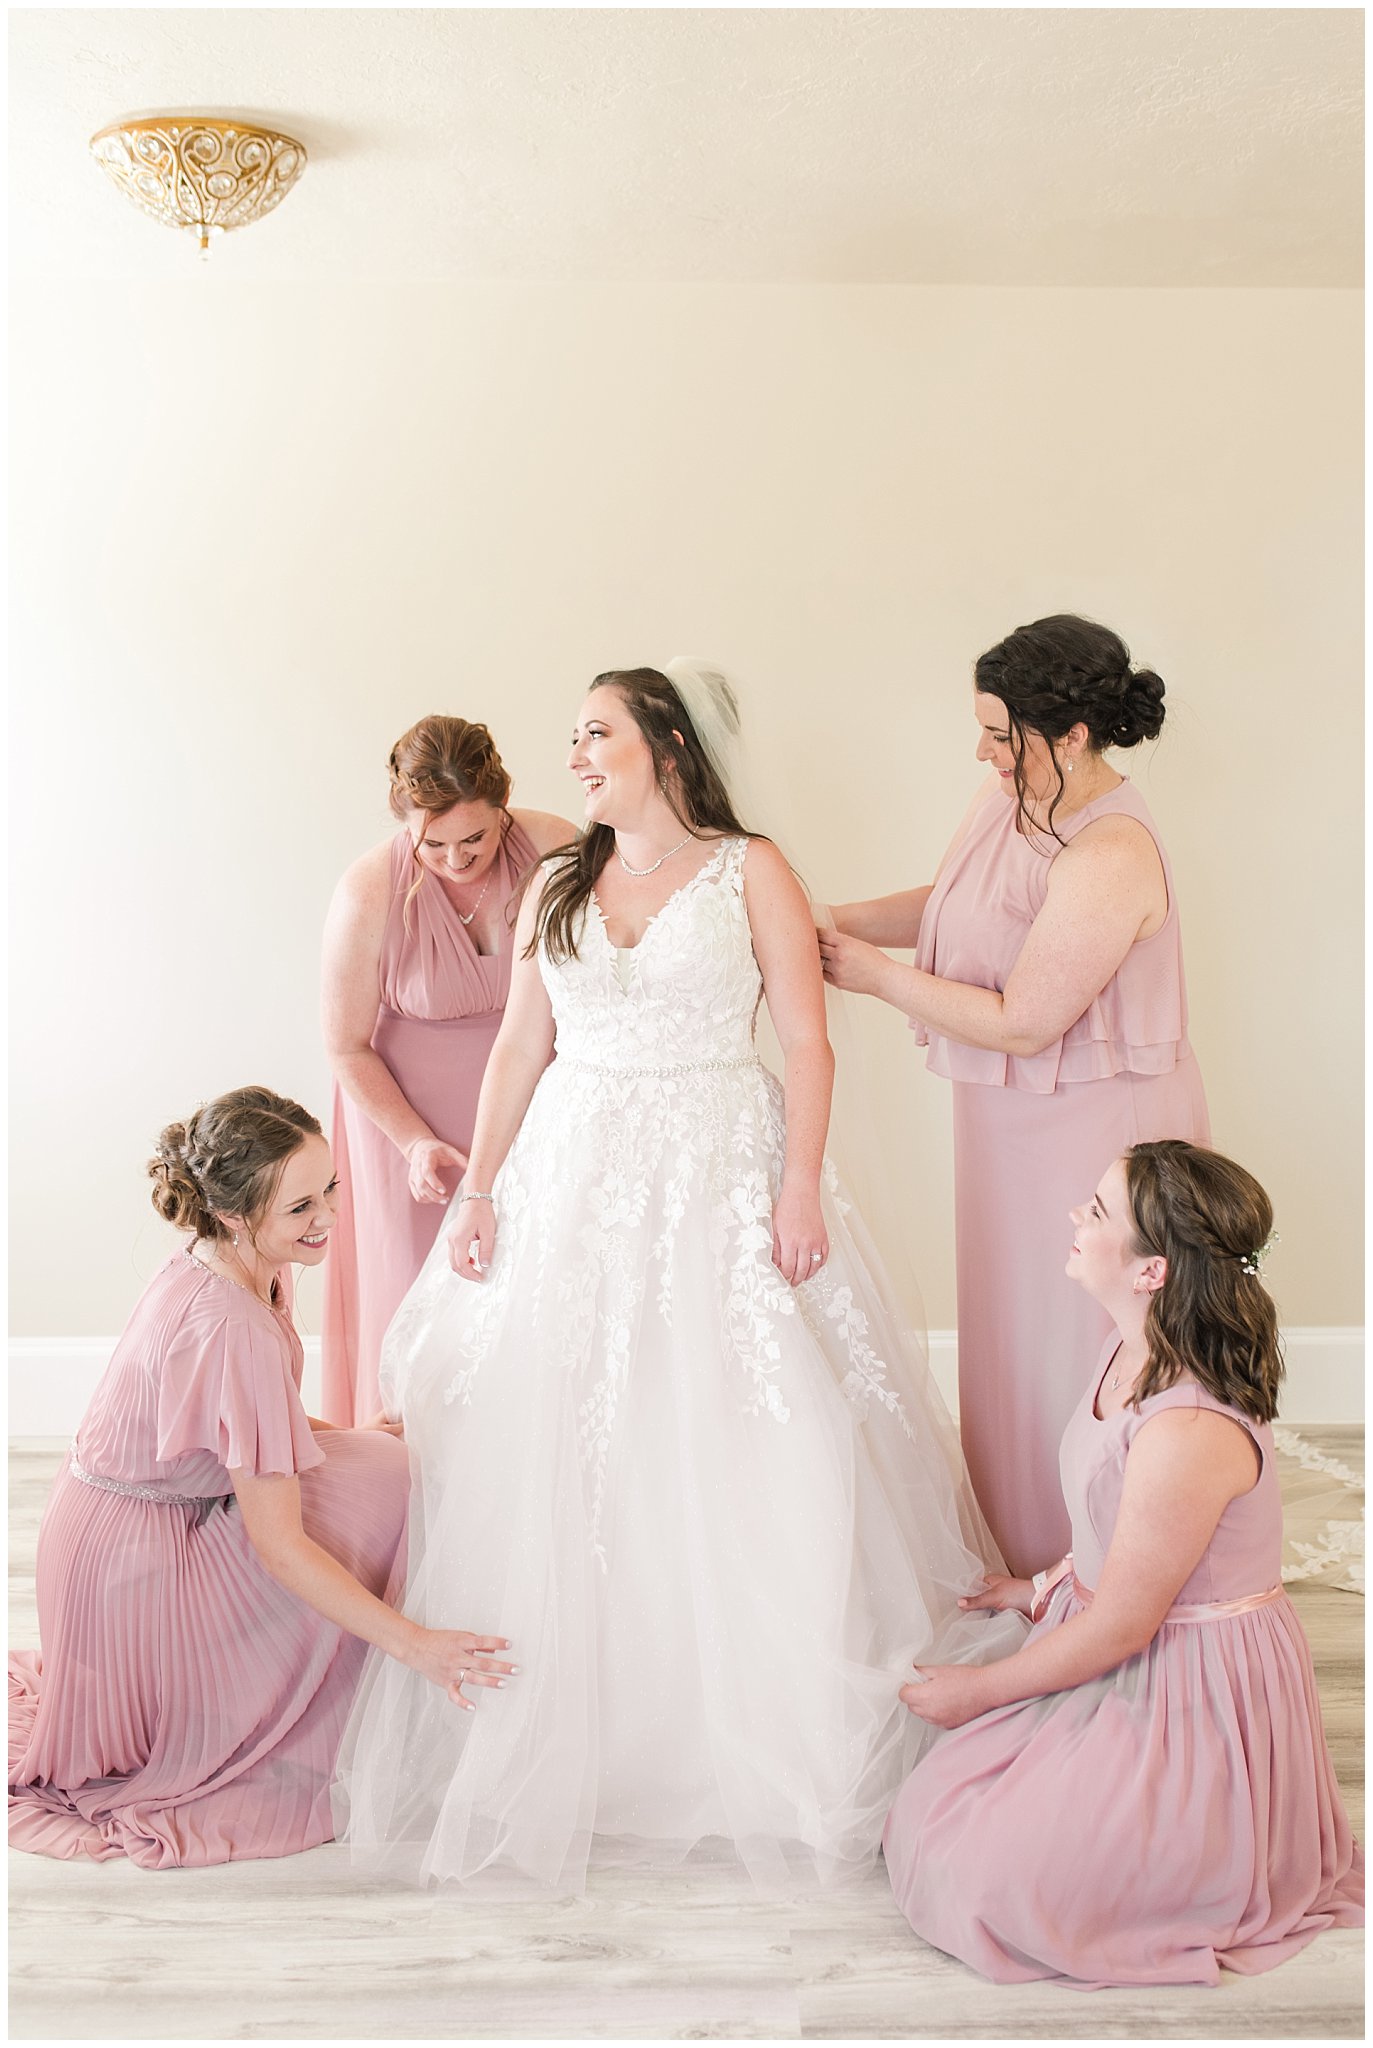 Bride with bridesmaids in dusty rose dresses getting ready | Oak Hills Utah Dusty Rose and Gray Summer Wedding | Jessie and Dallin Photography